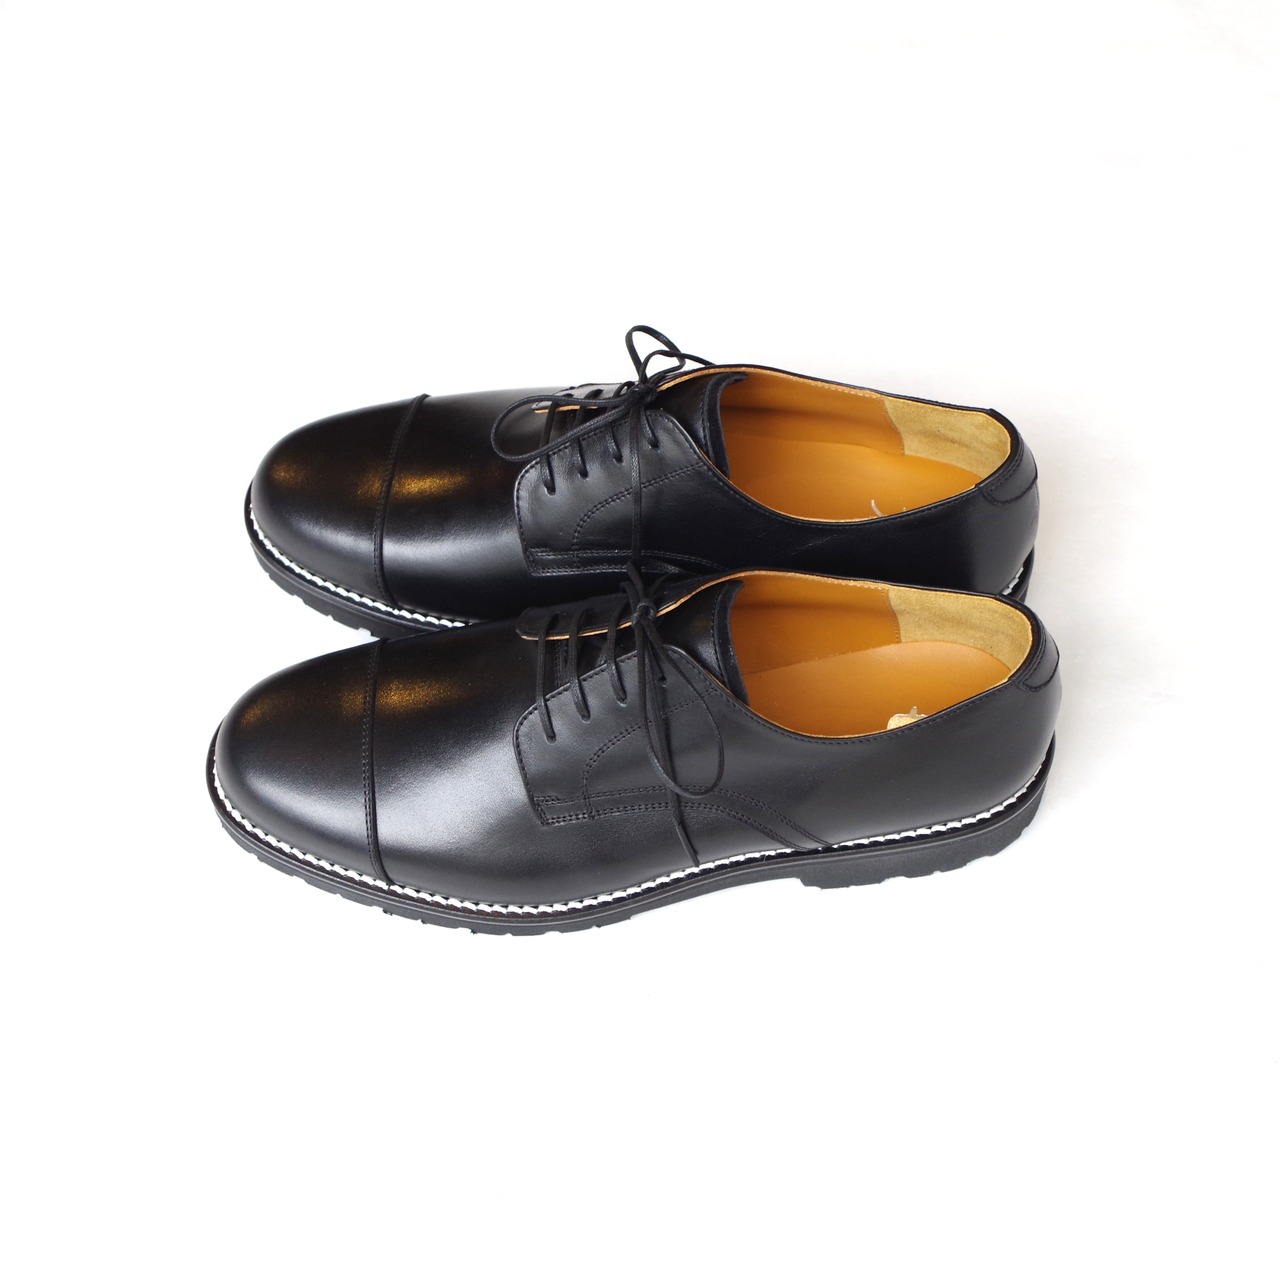 Tomo&Co   Straight Tip Shoes for 1F Store